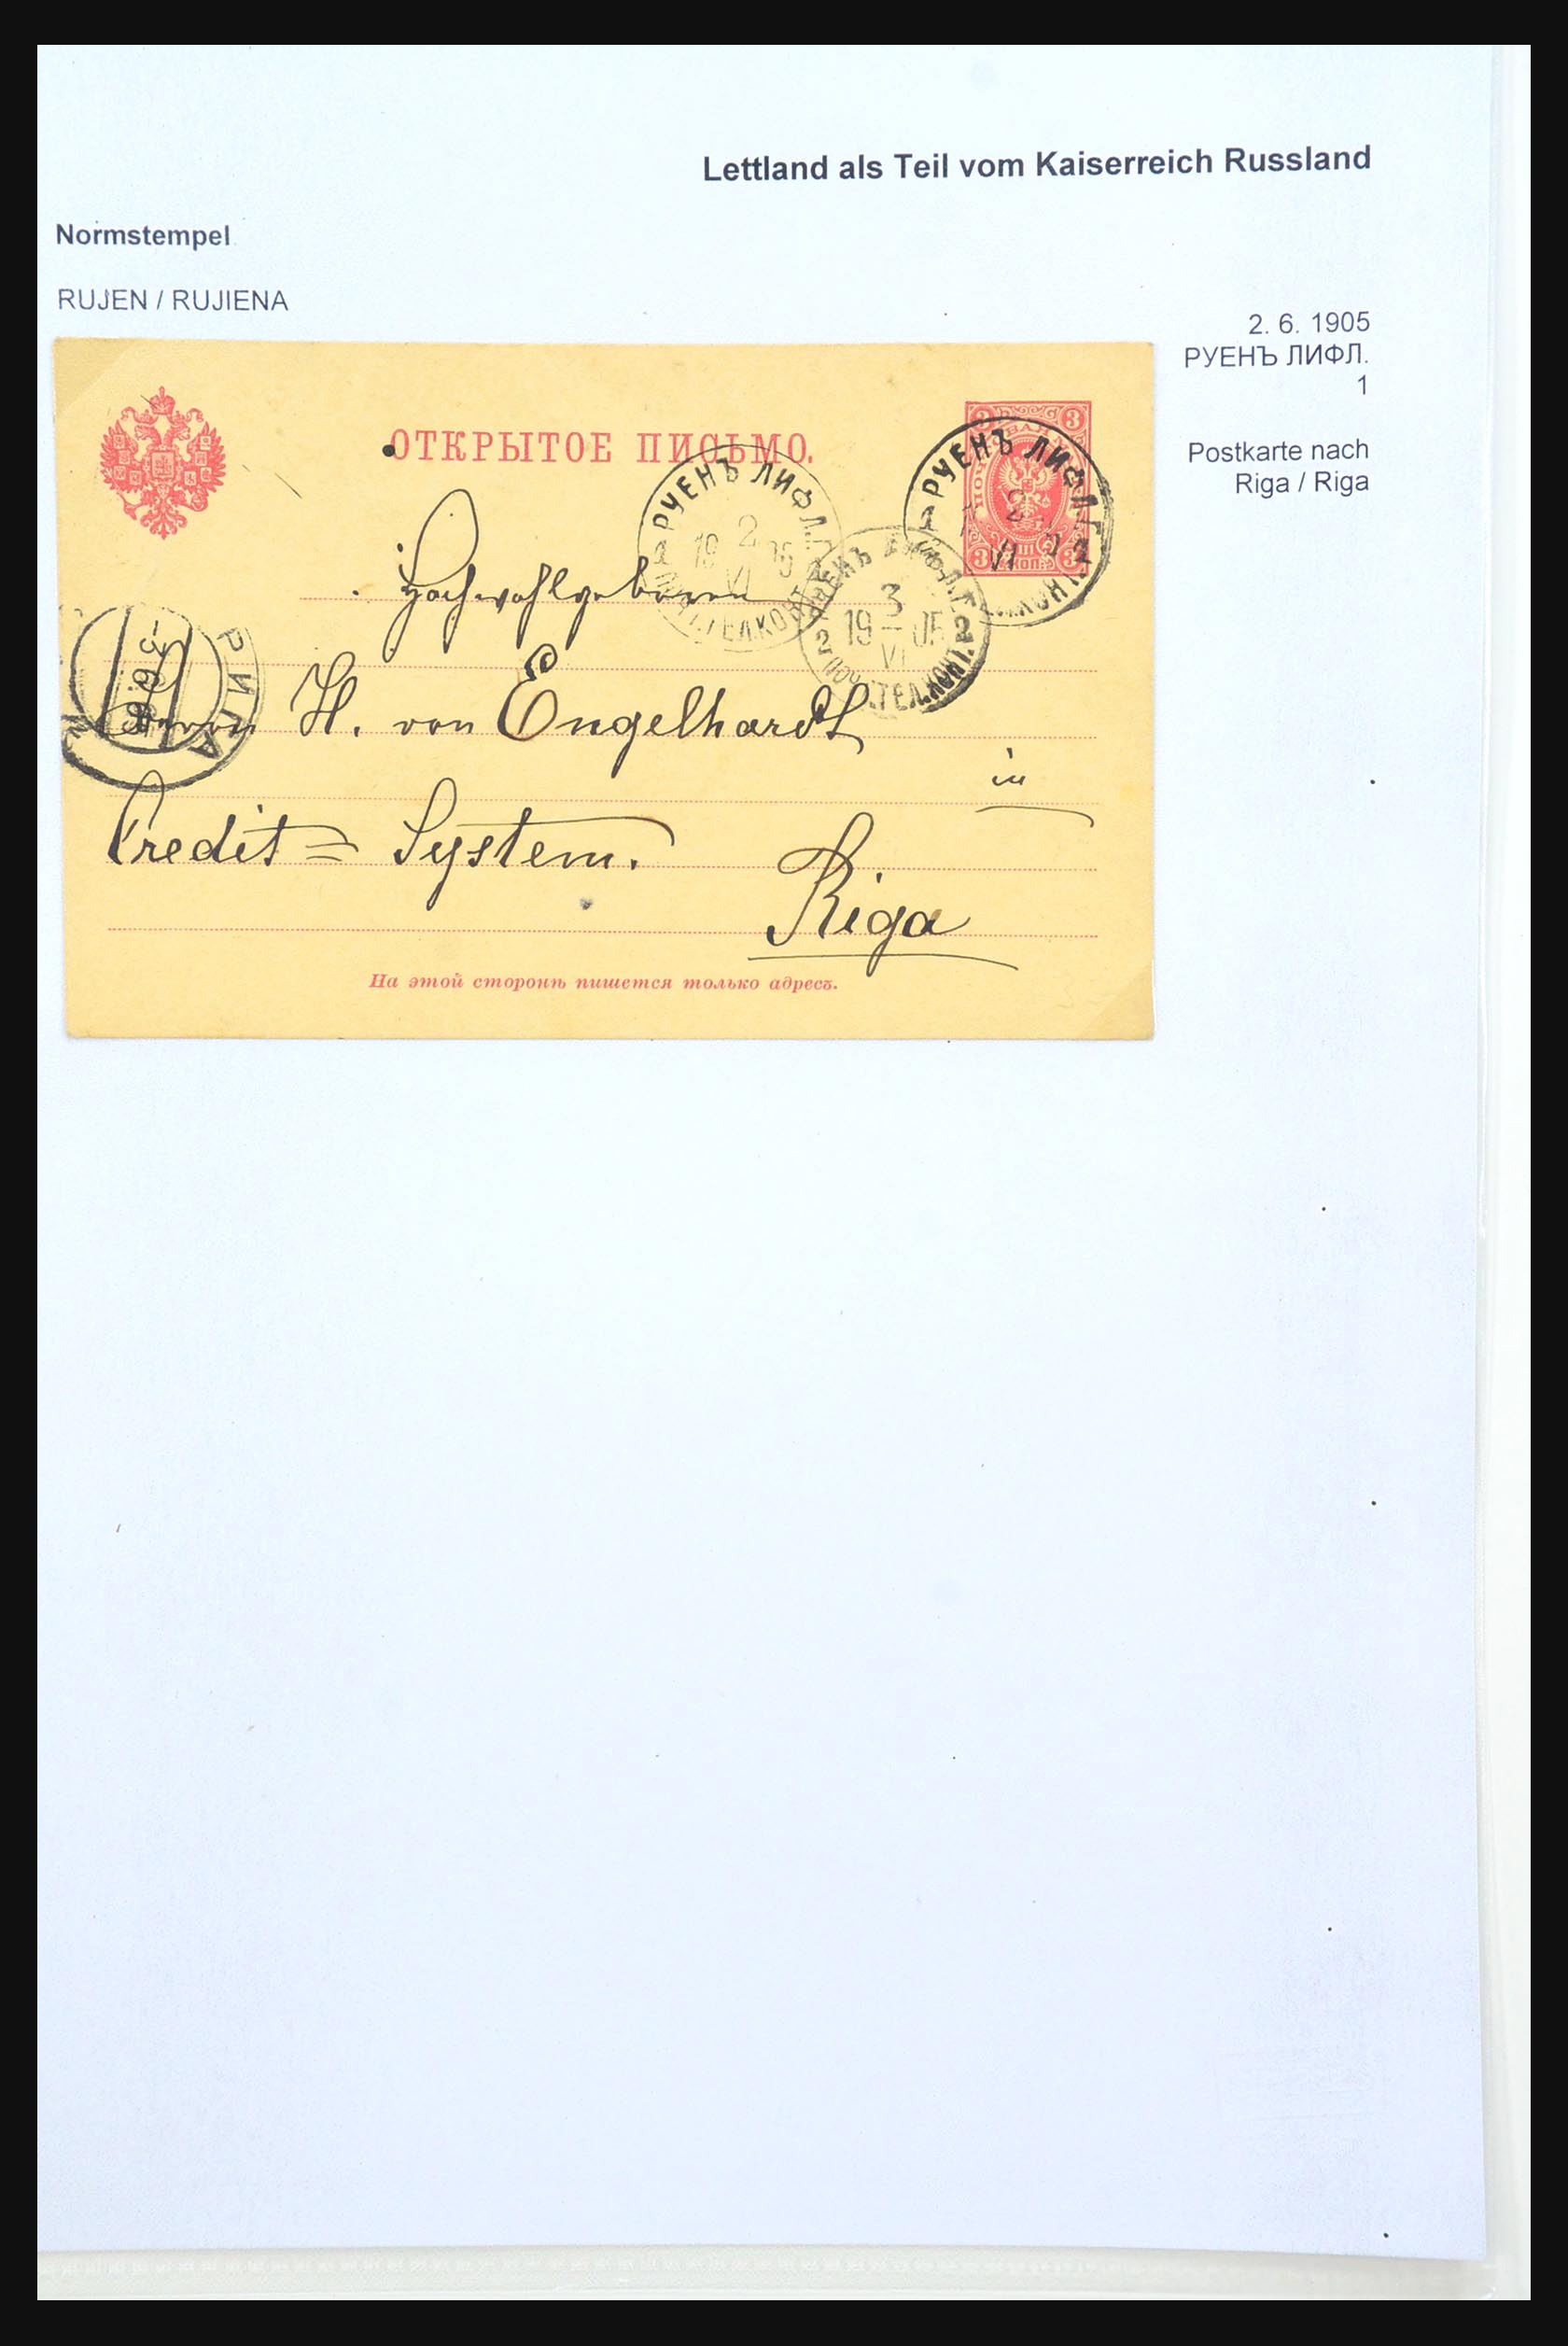 31305 092 - 31305 Latvia as part of Russia 1817-1918.